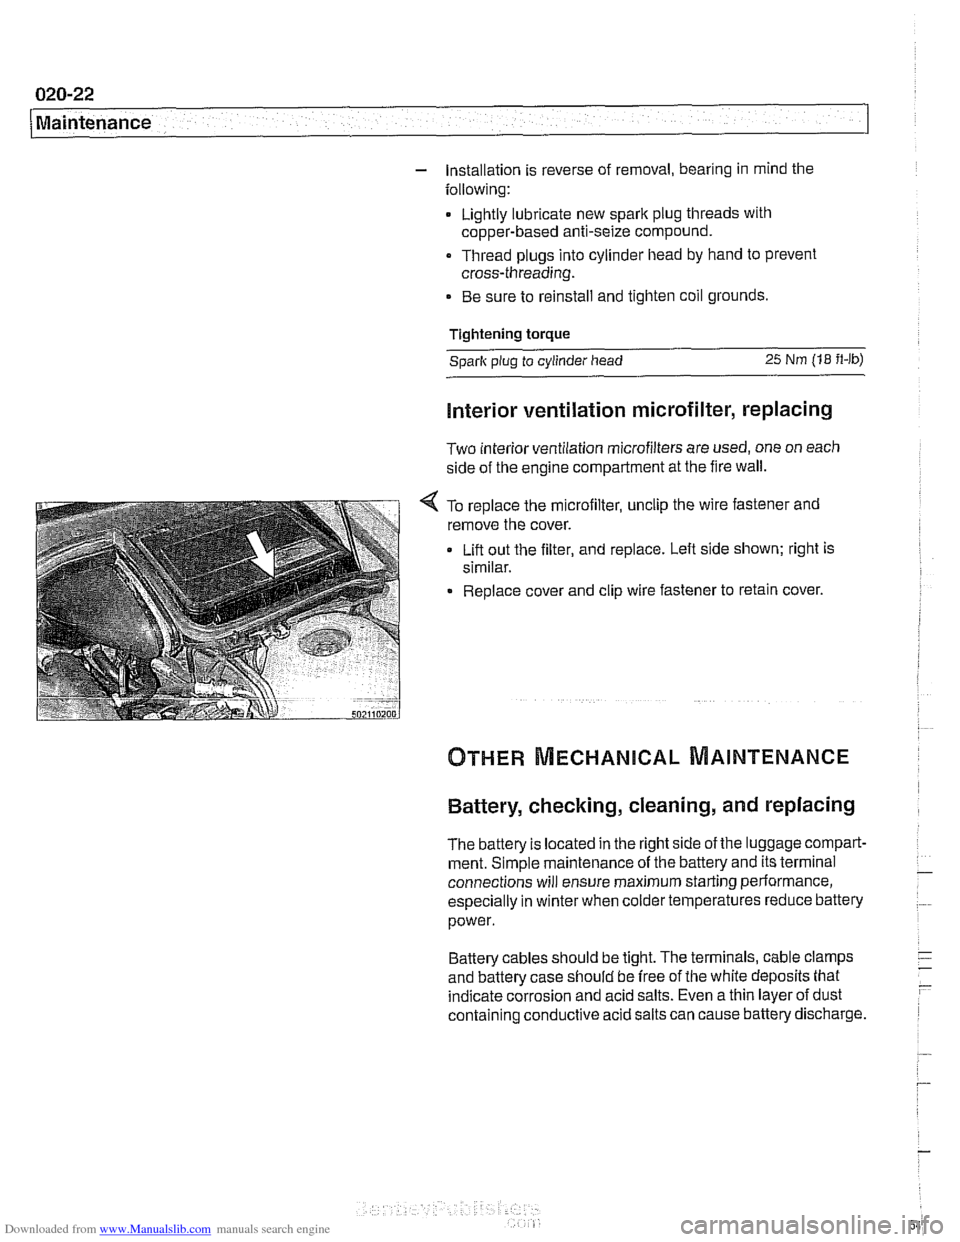 BMW 528i 2000 E39 Workshop Manual Downloaded from www.Manualslib.com manuals search engine 
020-22 Maintenance 
1 
- Installation is reverse  of removal,  bearing in mind  the 
following: 
Lightly lubricate  new 
spark plug  threads  